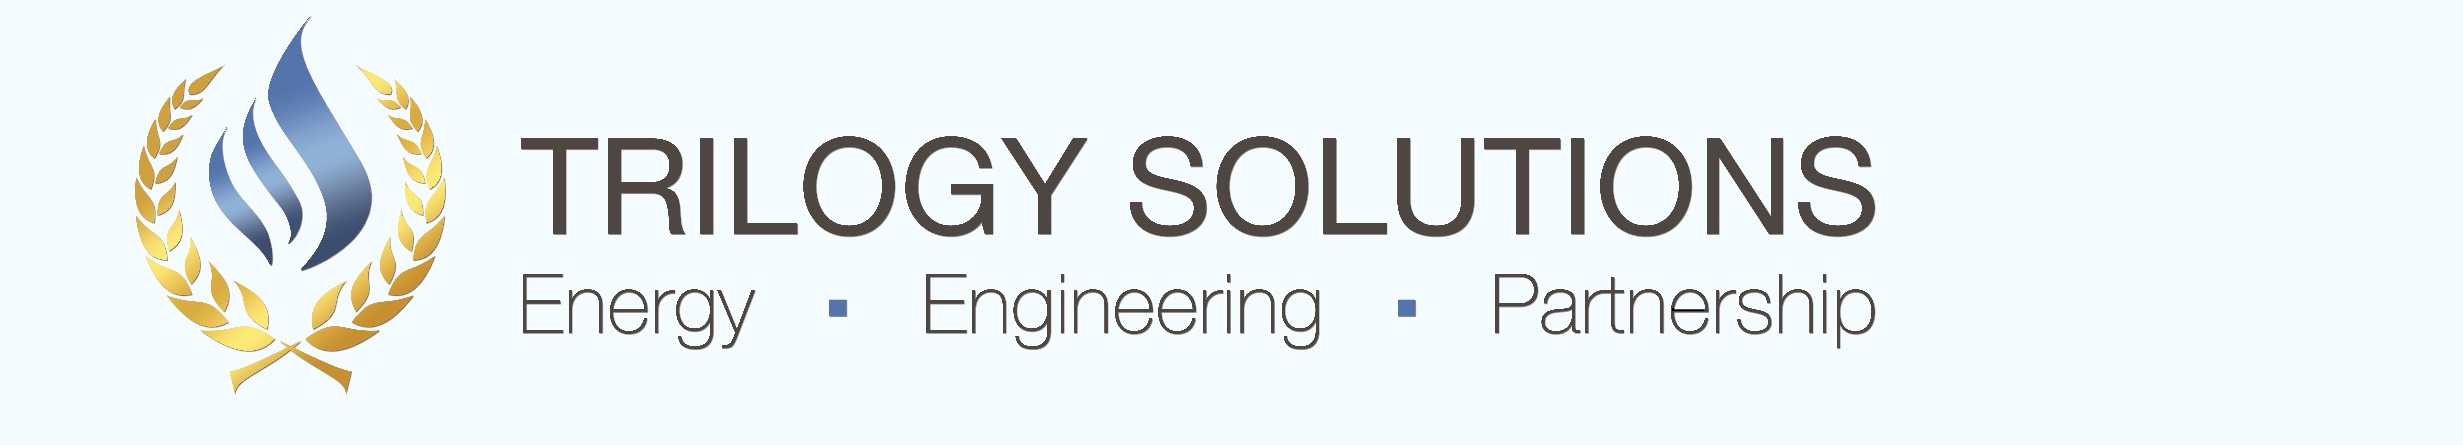      Trilogy Solutions